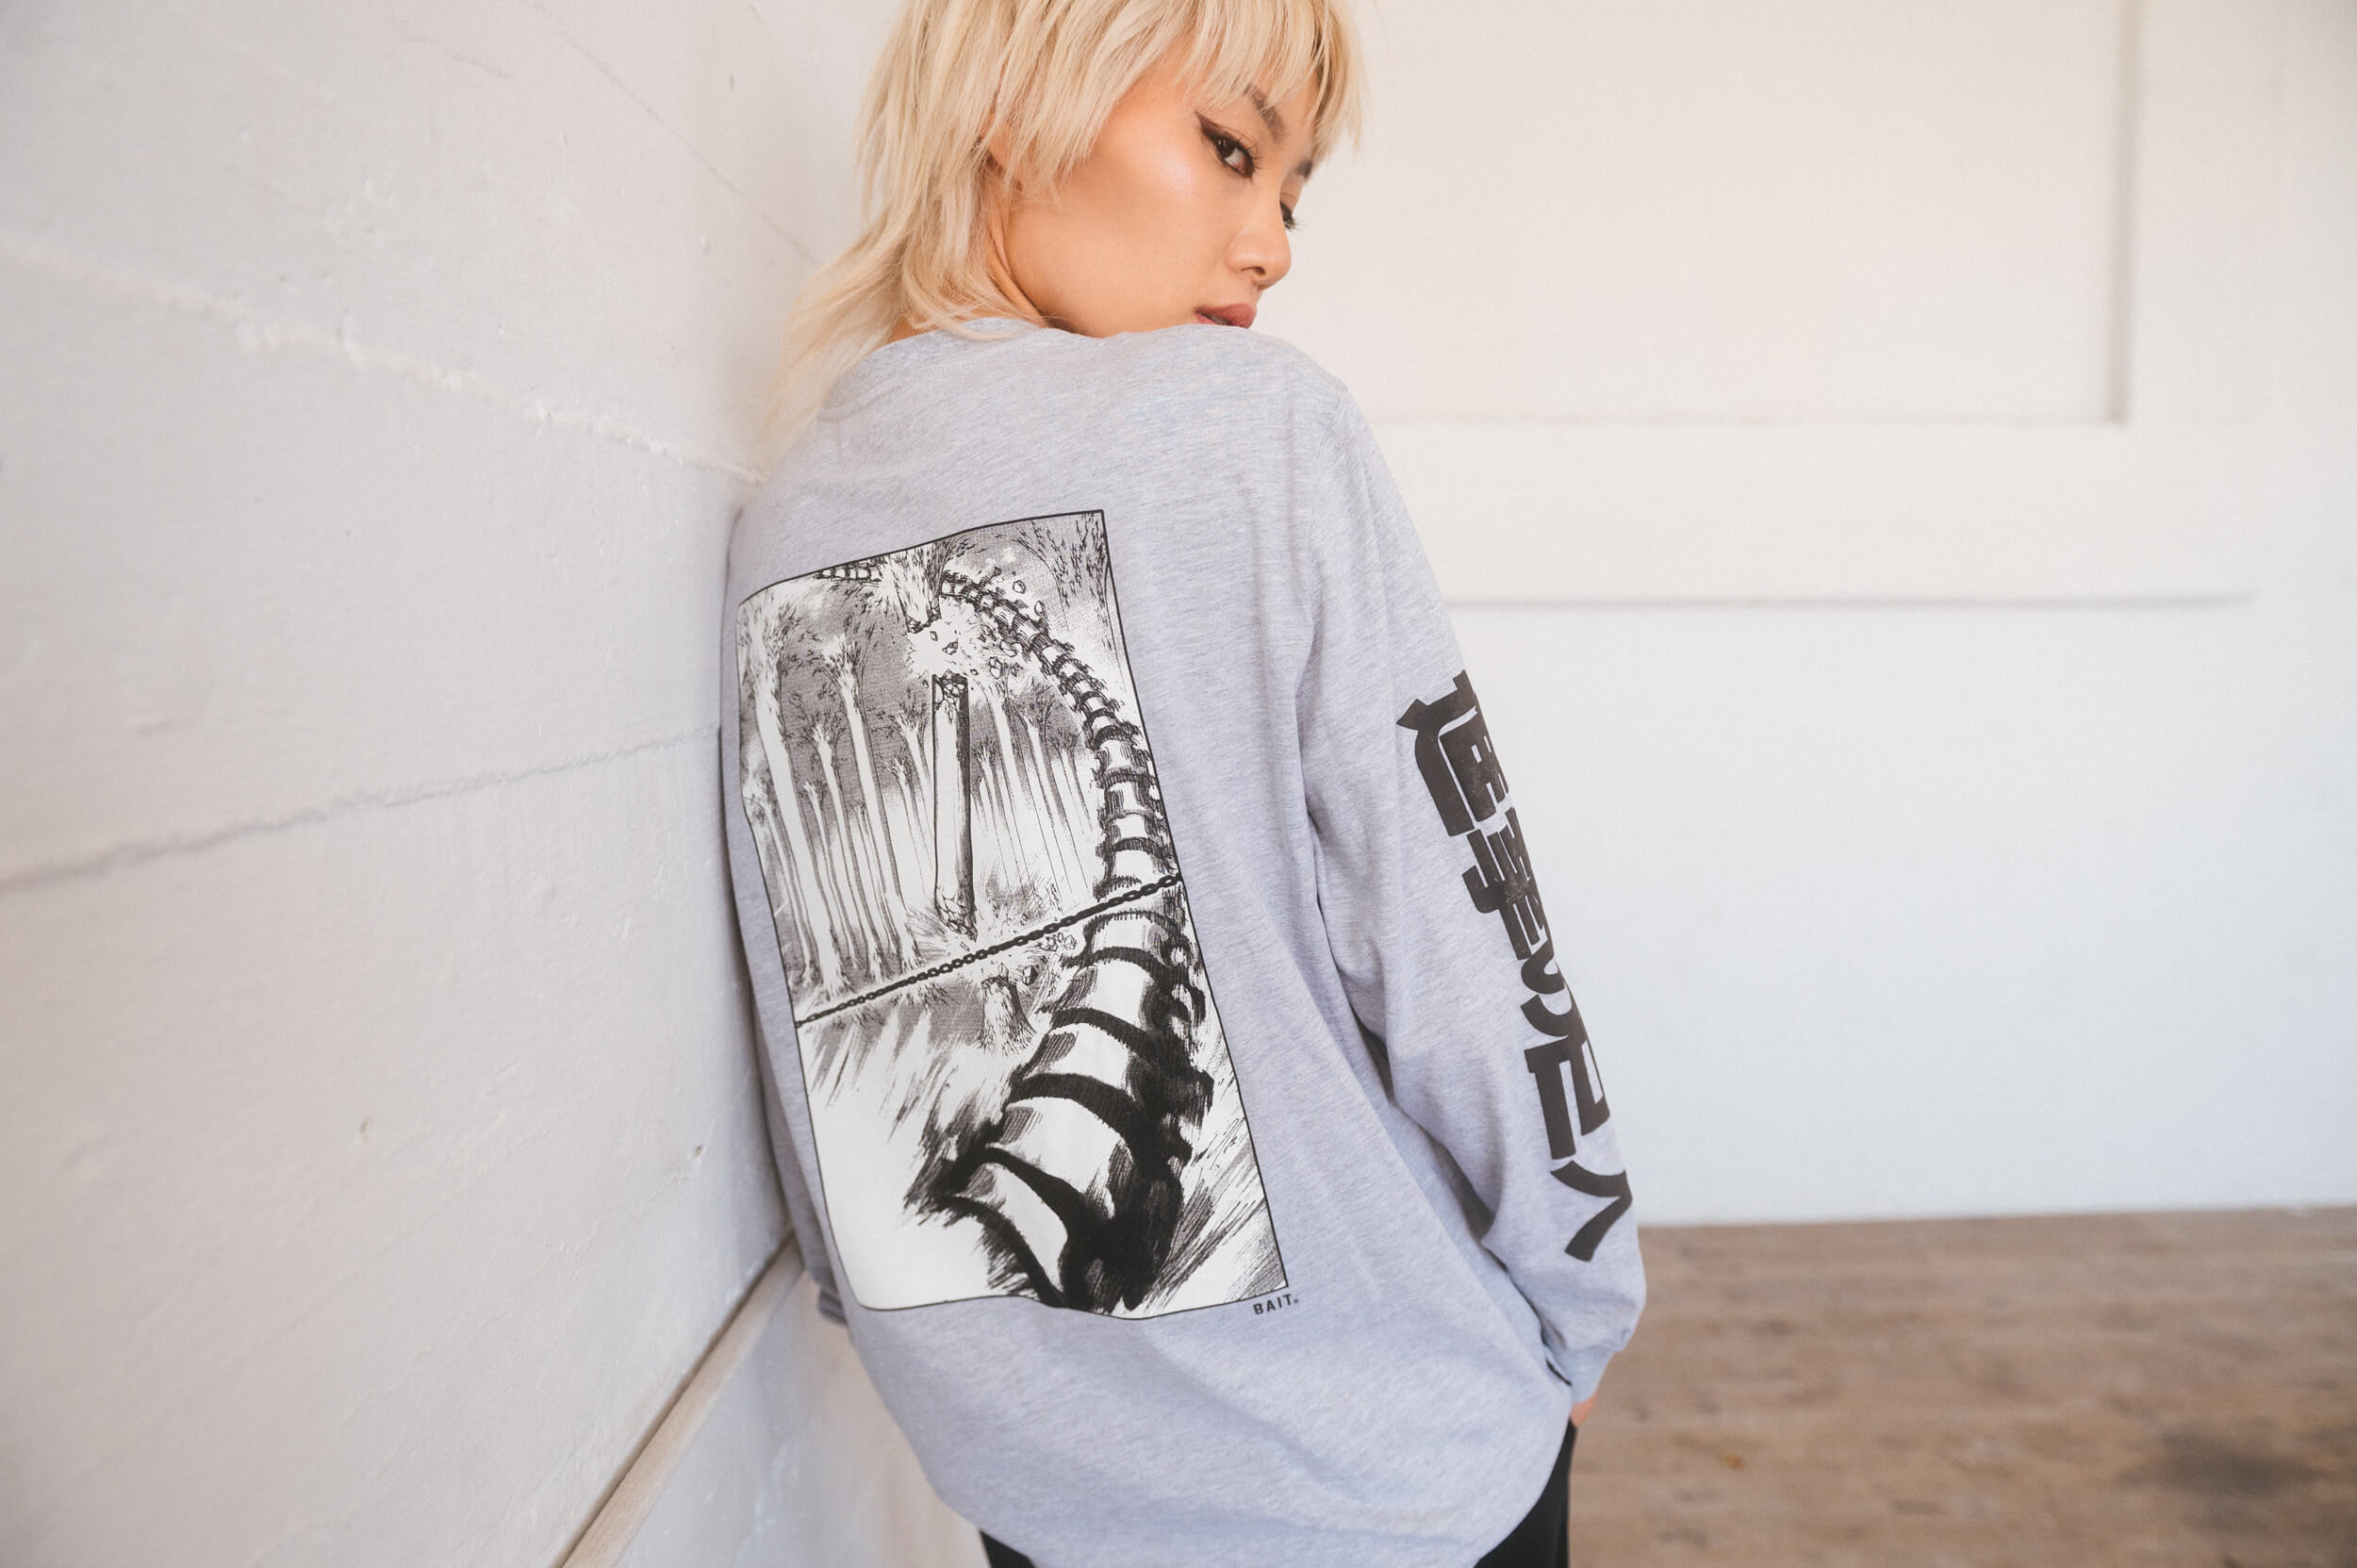 BAIT Attack on Titan Capsule Collection